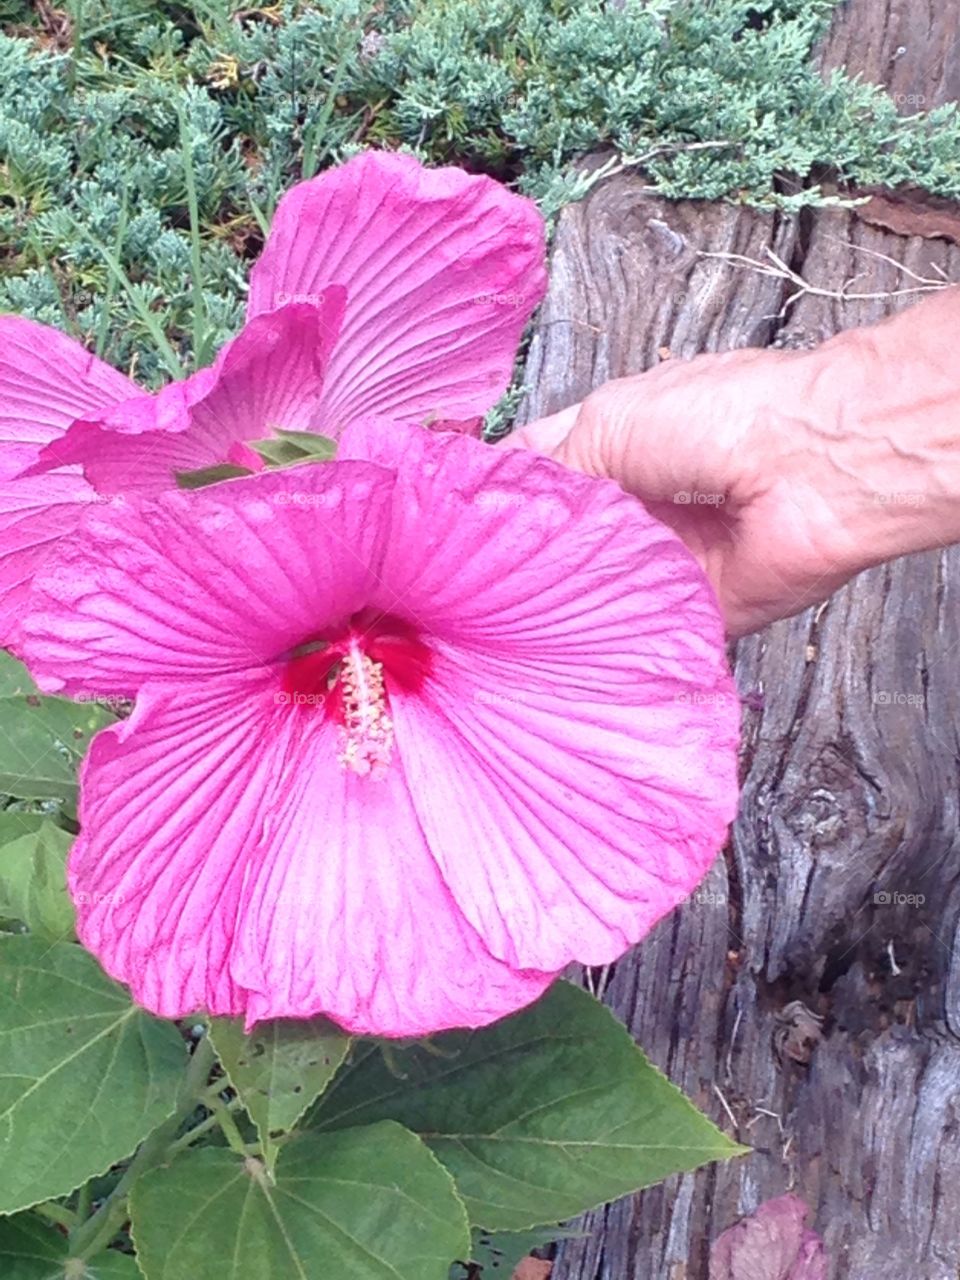 Taking care of the hibiscus 